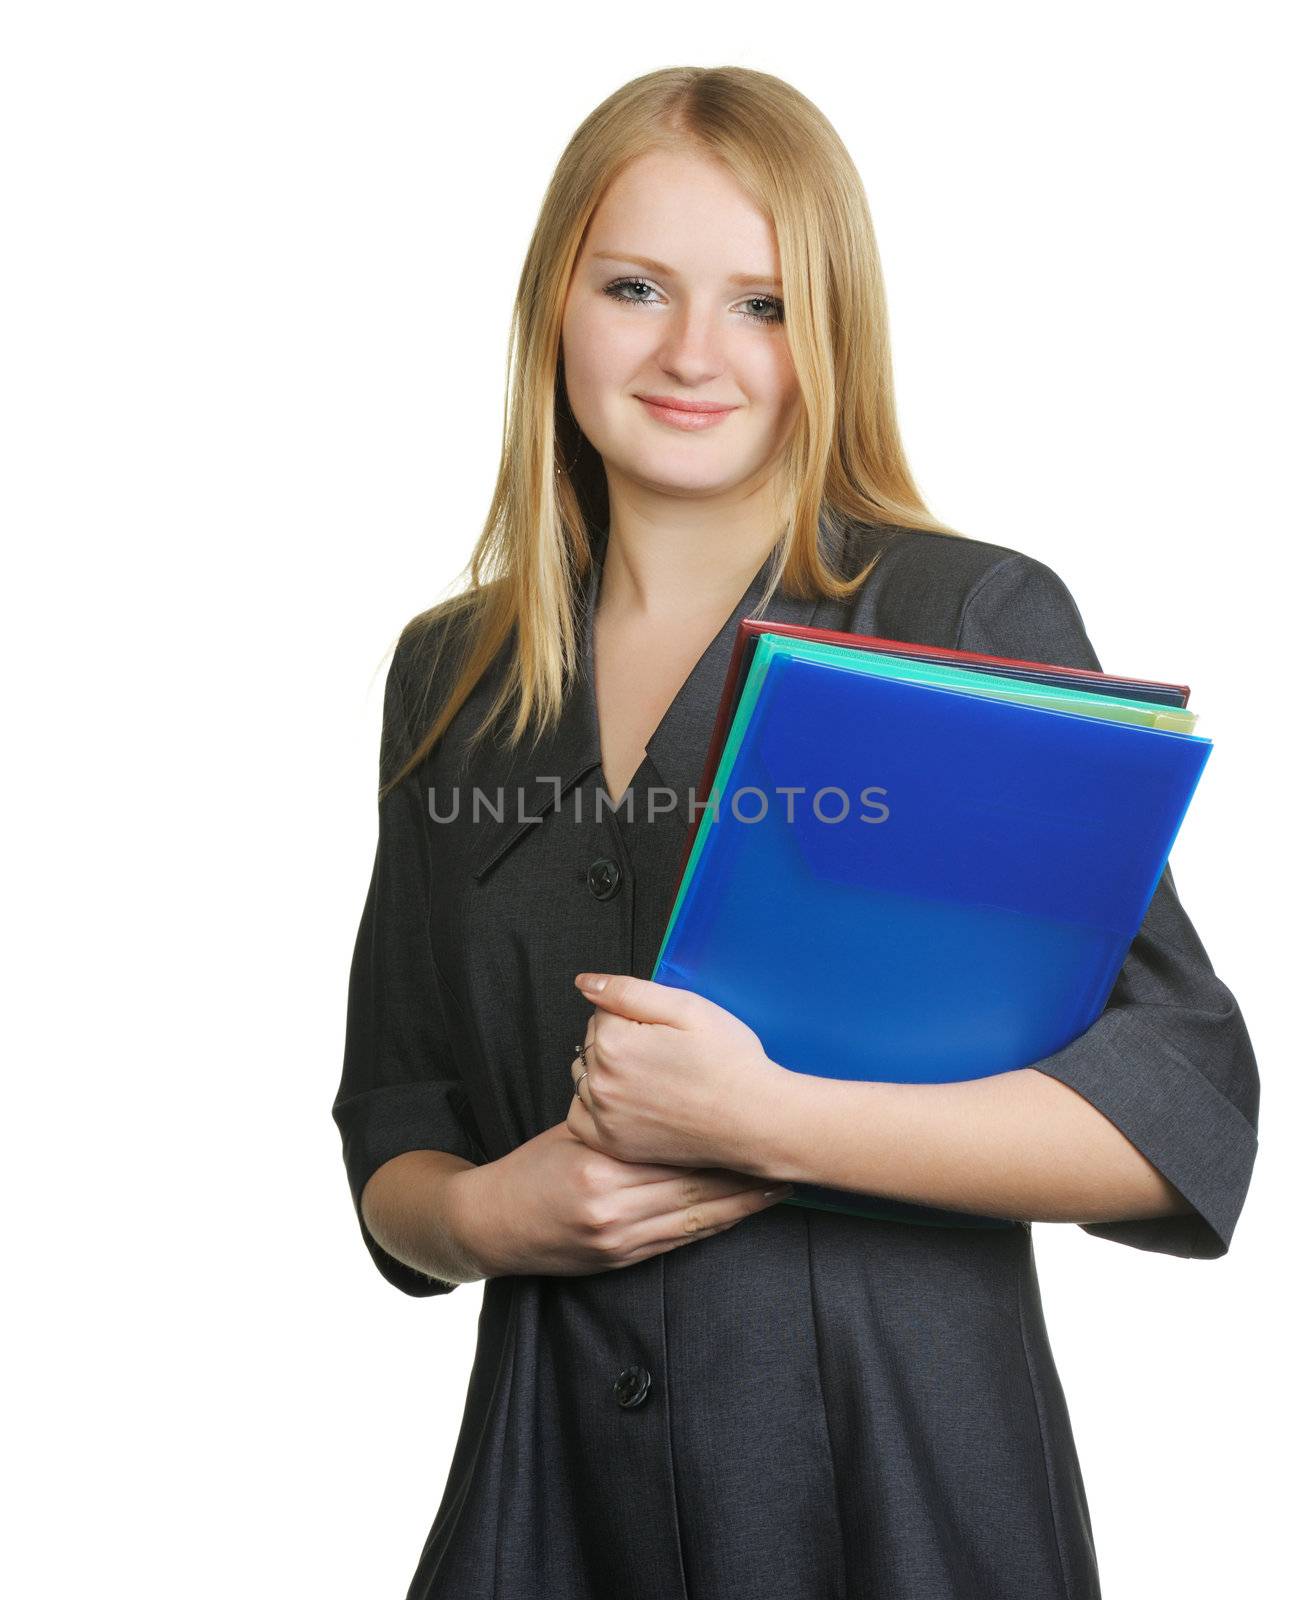 The blonde with official papers. The pretty young woman. On a white background